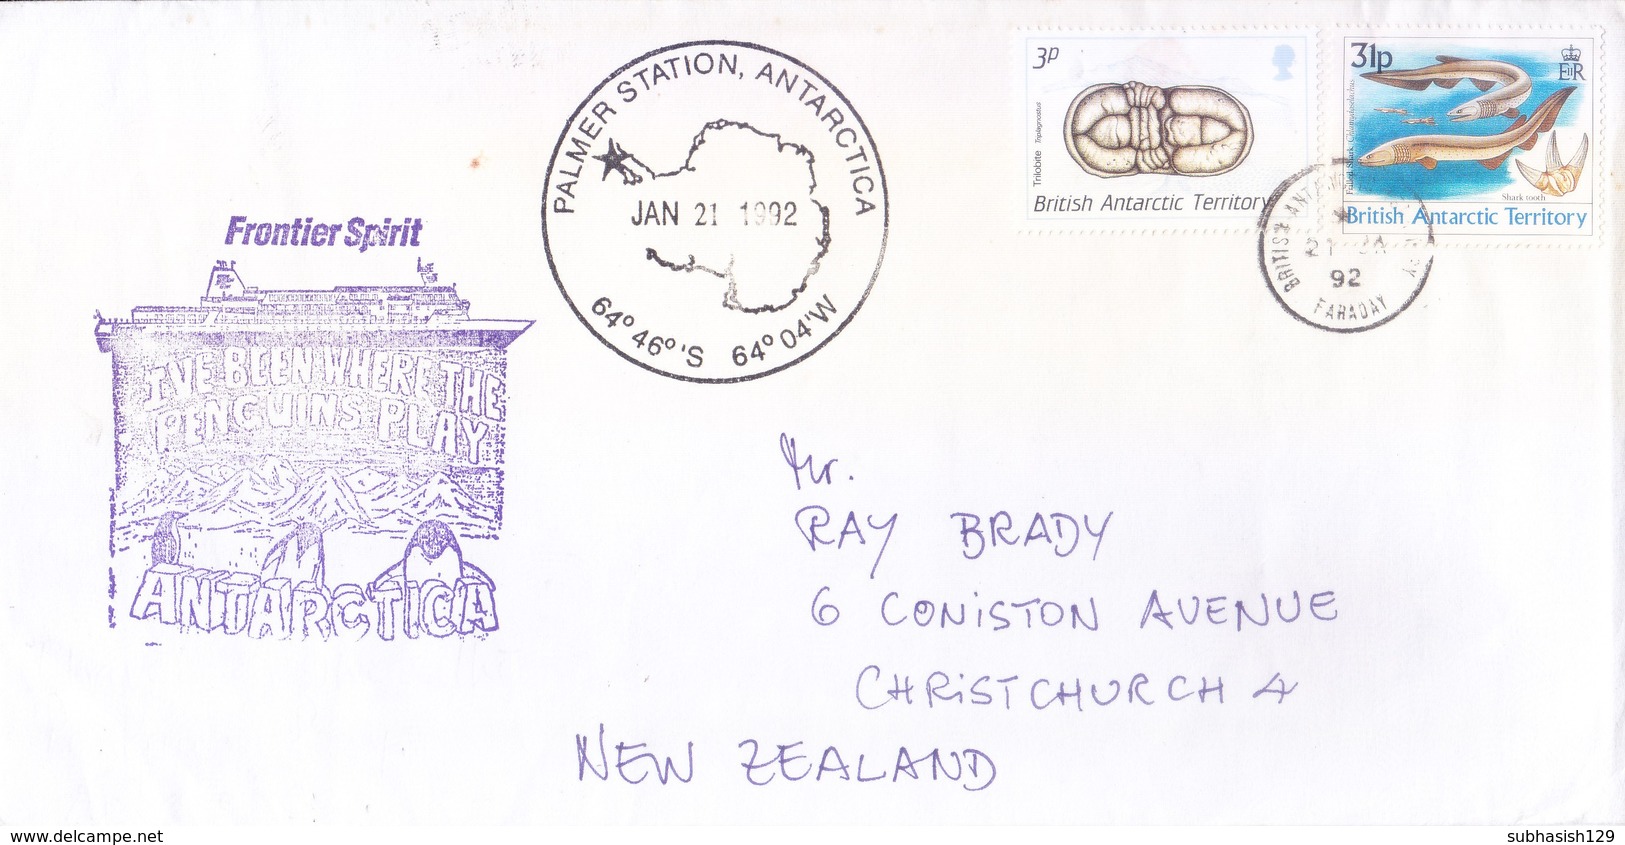 BRITISH ANTARCTIC TERRITORY - EXPEDITION COVER, 1992 - FRONTIER SPIRIT, SLOGAN CANCELLATION, PALMER STATION - Covers & Documents